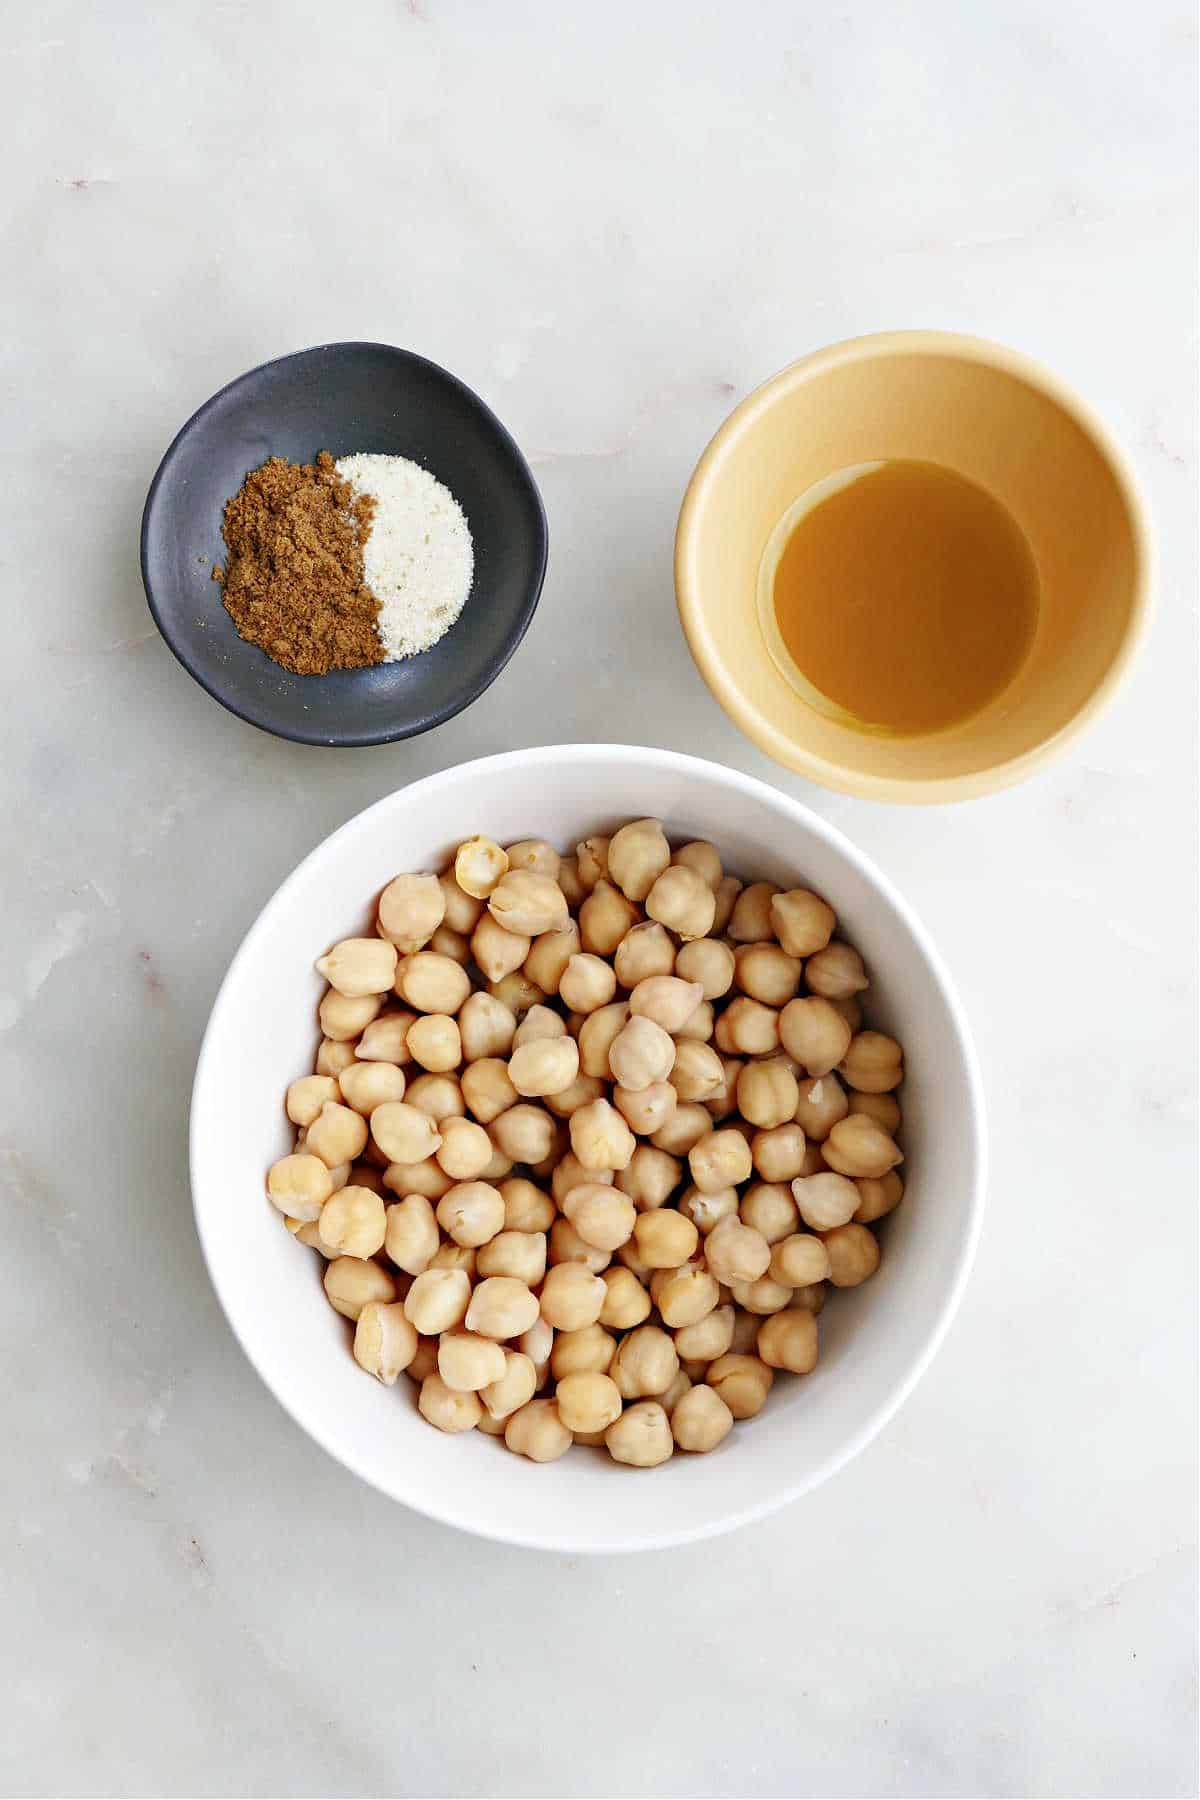 canned chickpeas in a bowl next to olive oil and seasonings on a counter